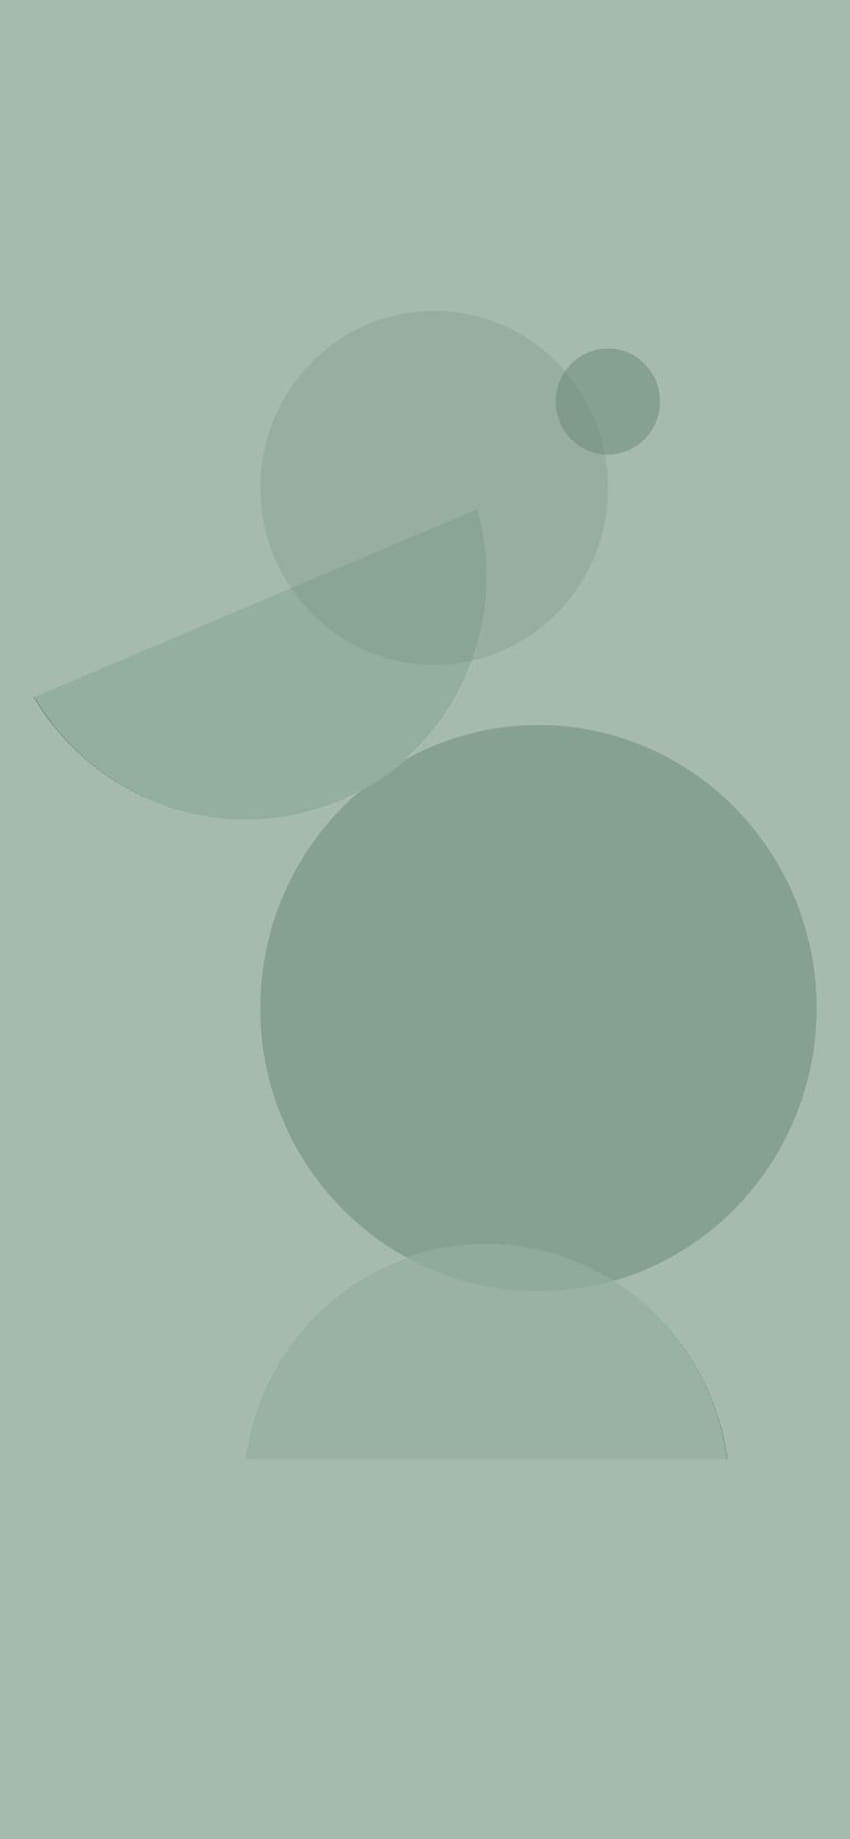 35 Sage Green Aesthetic : Modern Abstract Backgrounds iPhone, セージグリーンハート HD電話の壁紙